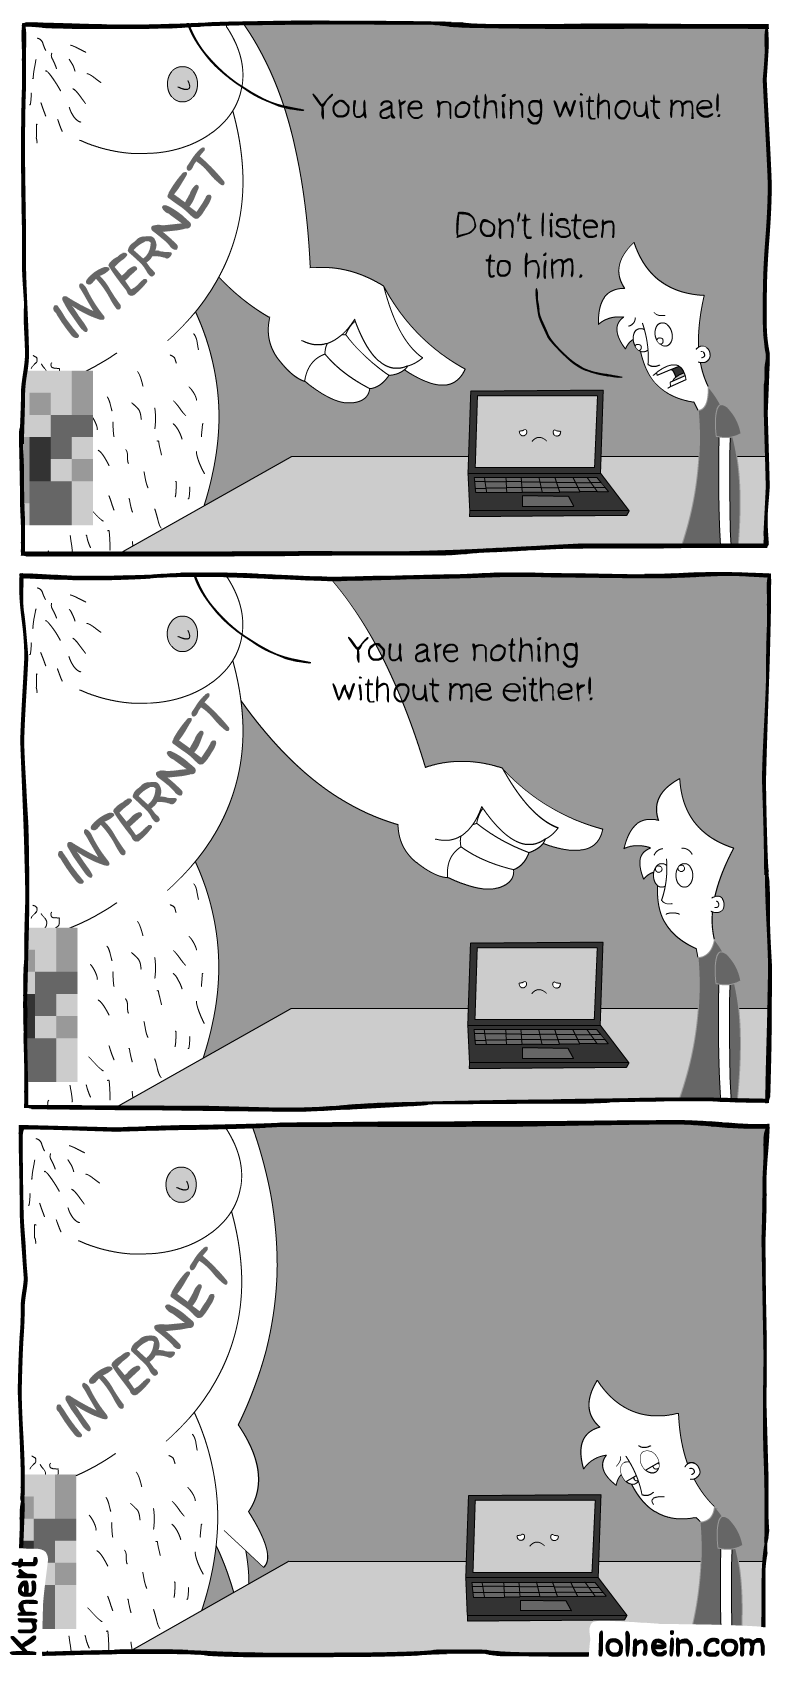 Without Internet